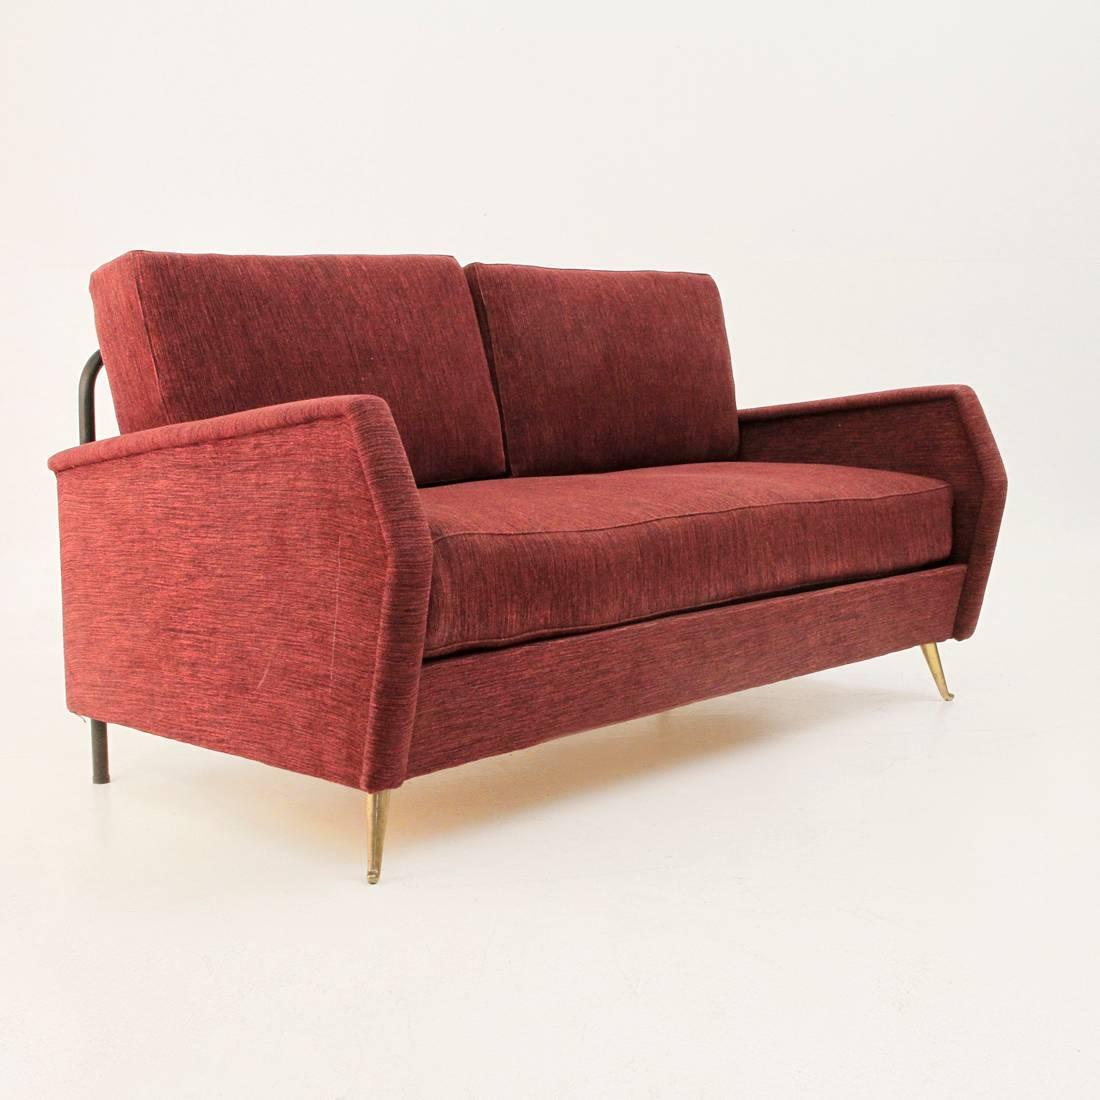 Two seat sofa, Italian 1950s production.
Wooden and metal structure, padded and lined with fabric.
Big cushion on the seat and two pillows as backrest.
One side descends and allows it to become bed.
Front legs in cast brass.
Good general